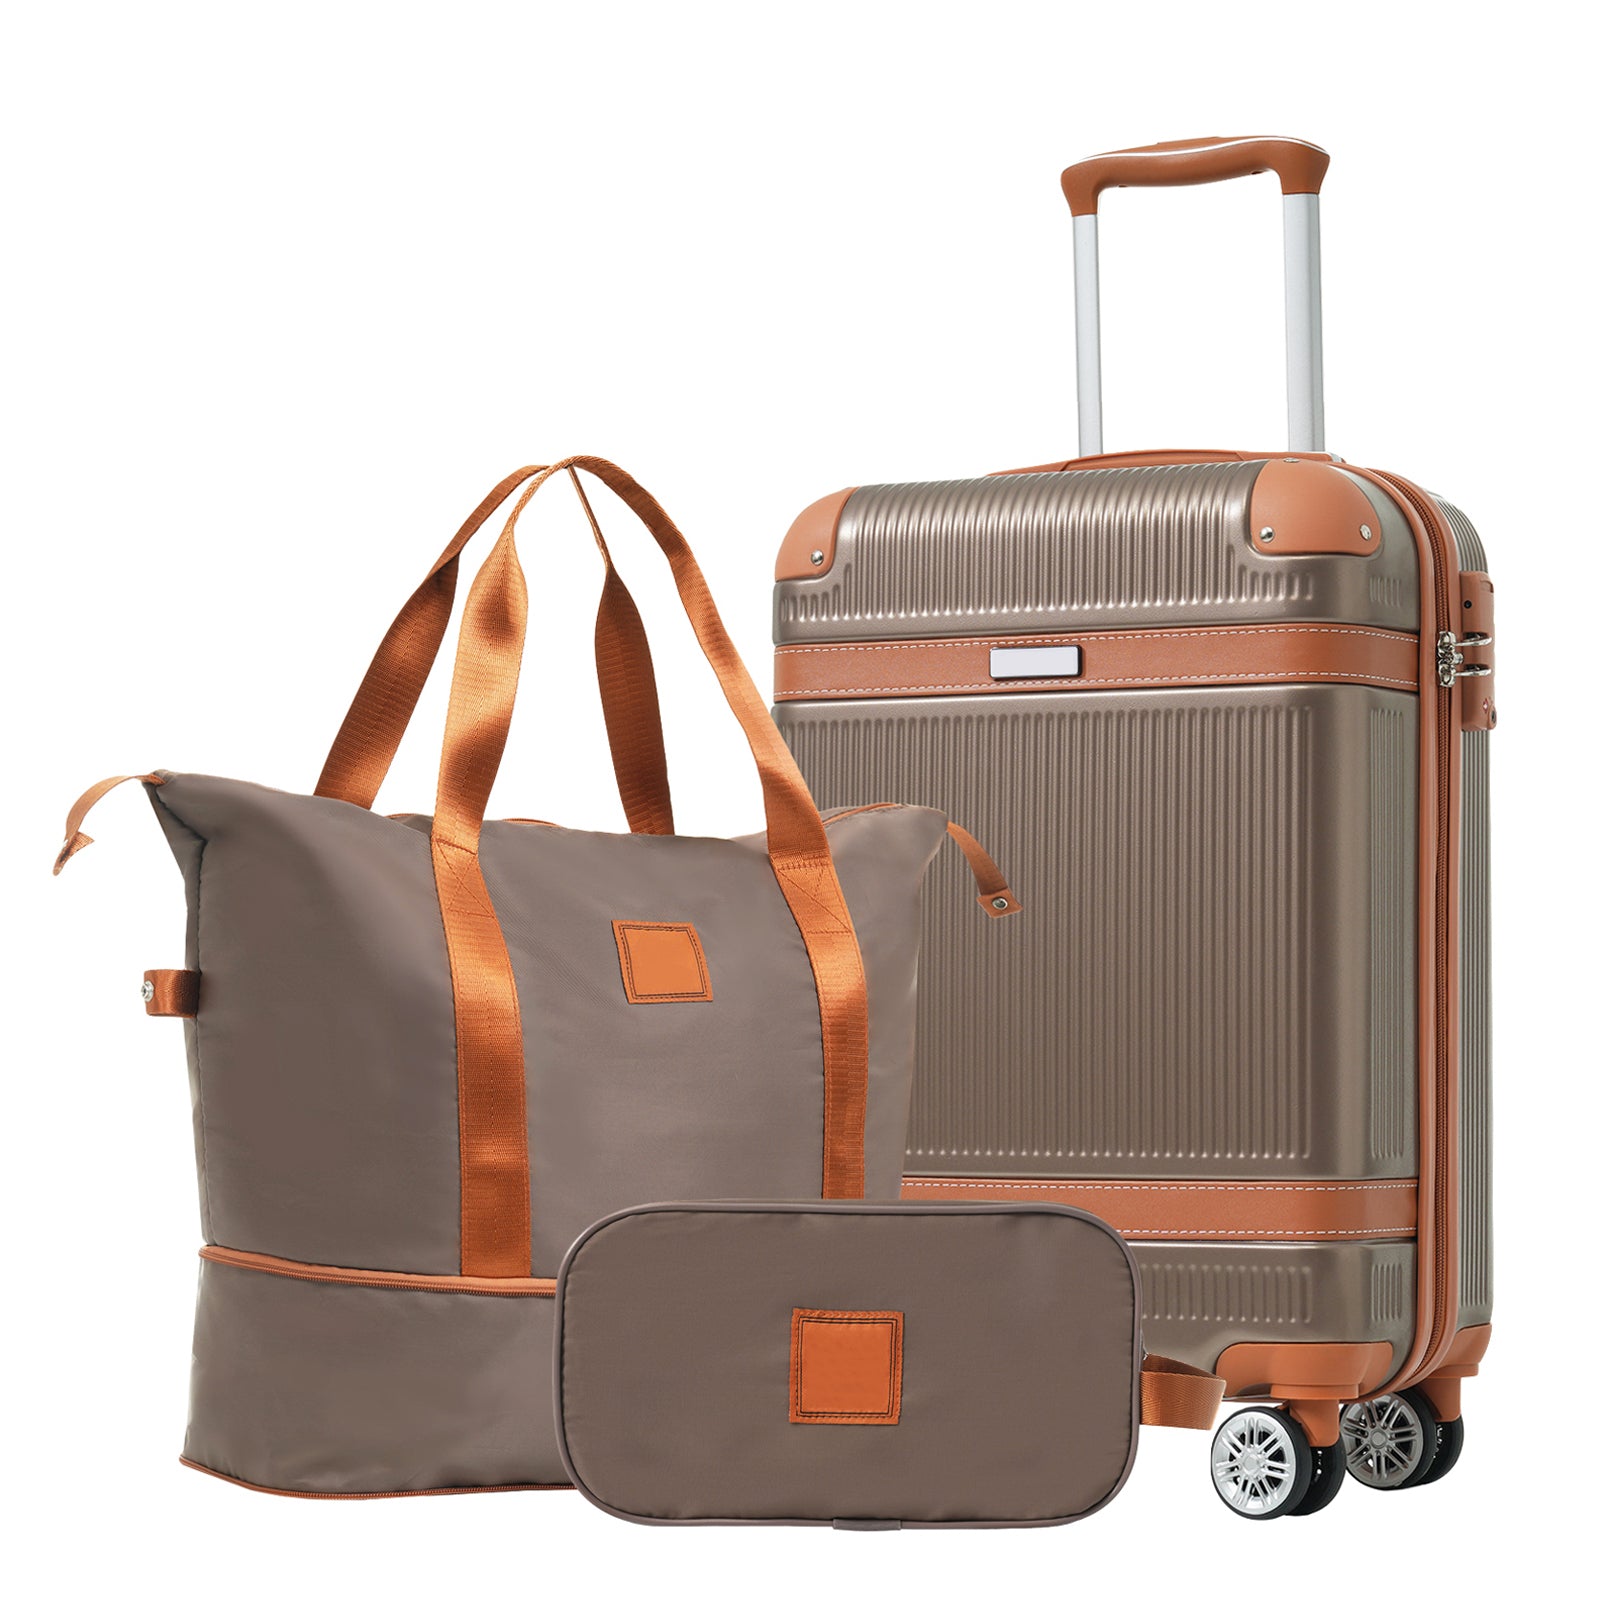 Hardshell Luggage Sets 3 Piece Carry on Suitcase coppery-abs